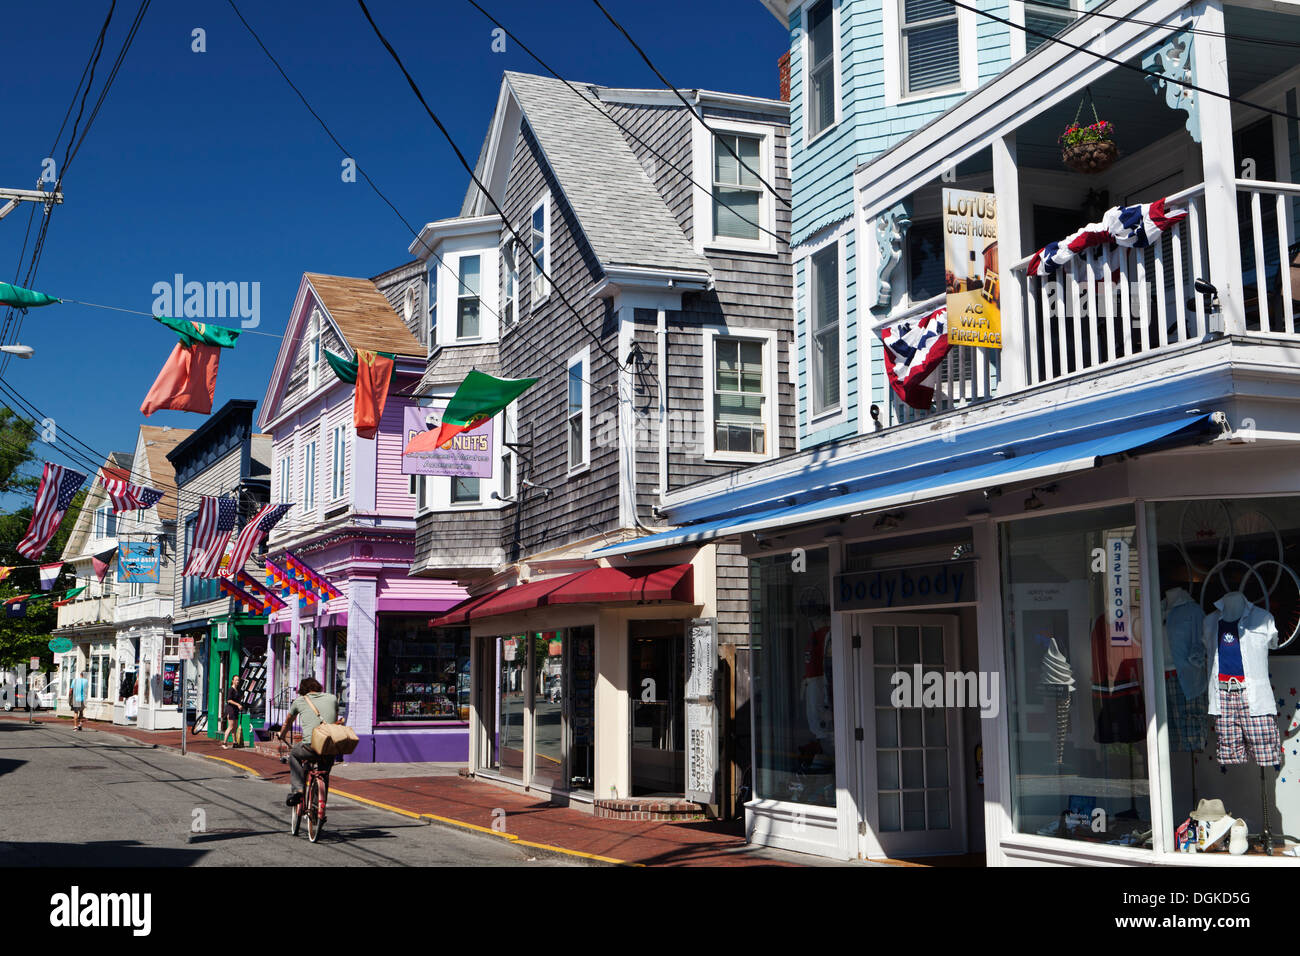 A view along Commercial Street in Provincetown on Cape Cod. Stock Photo